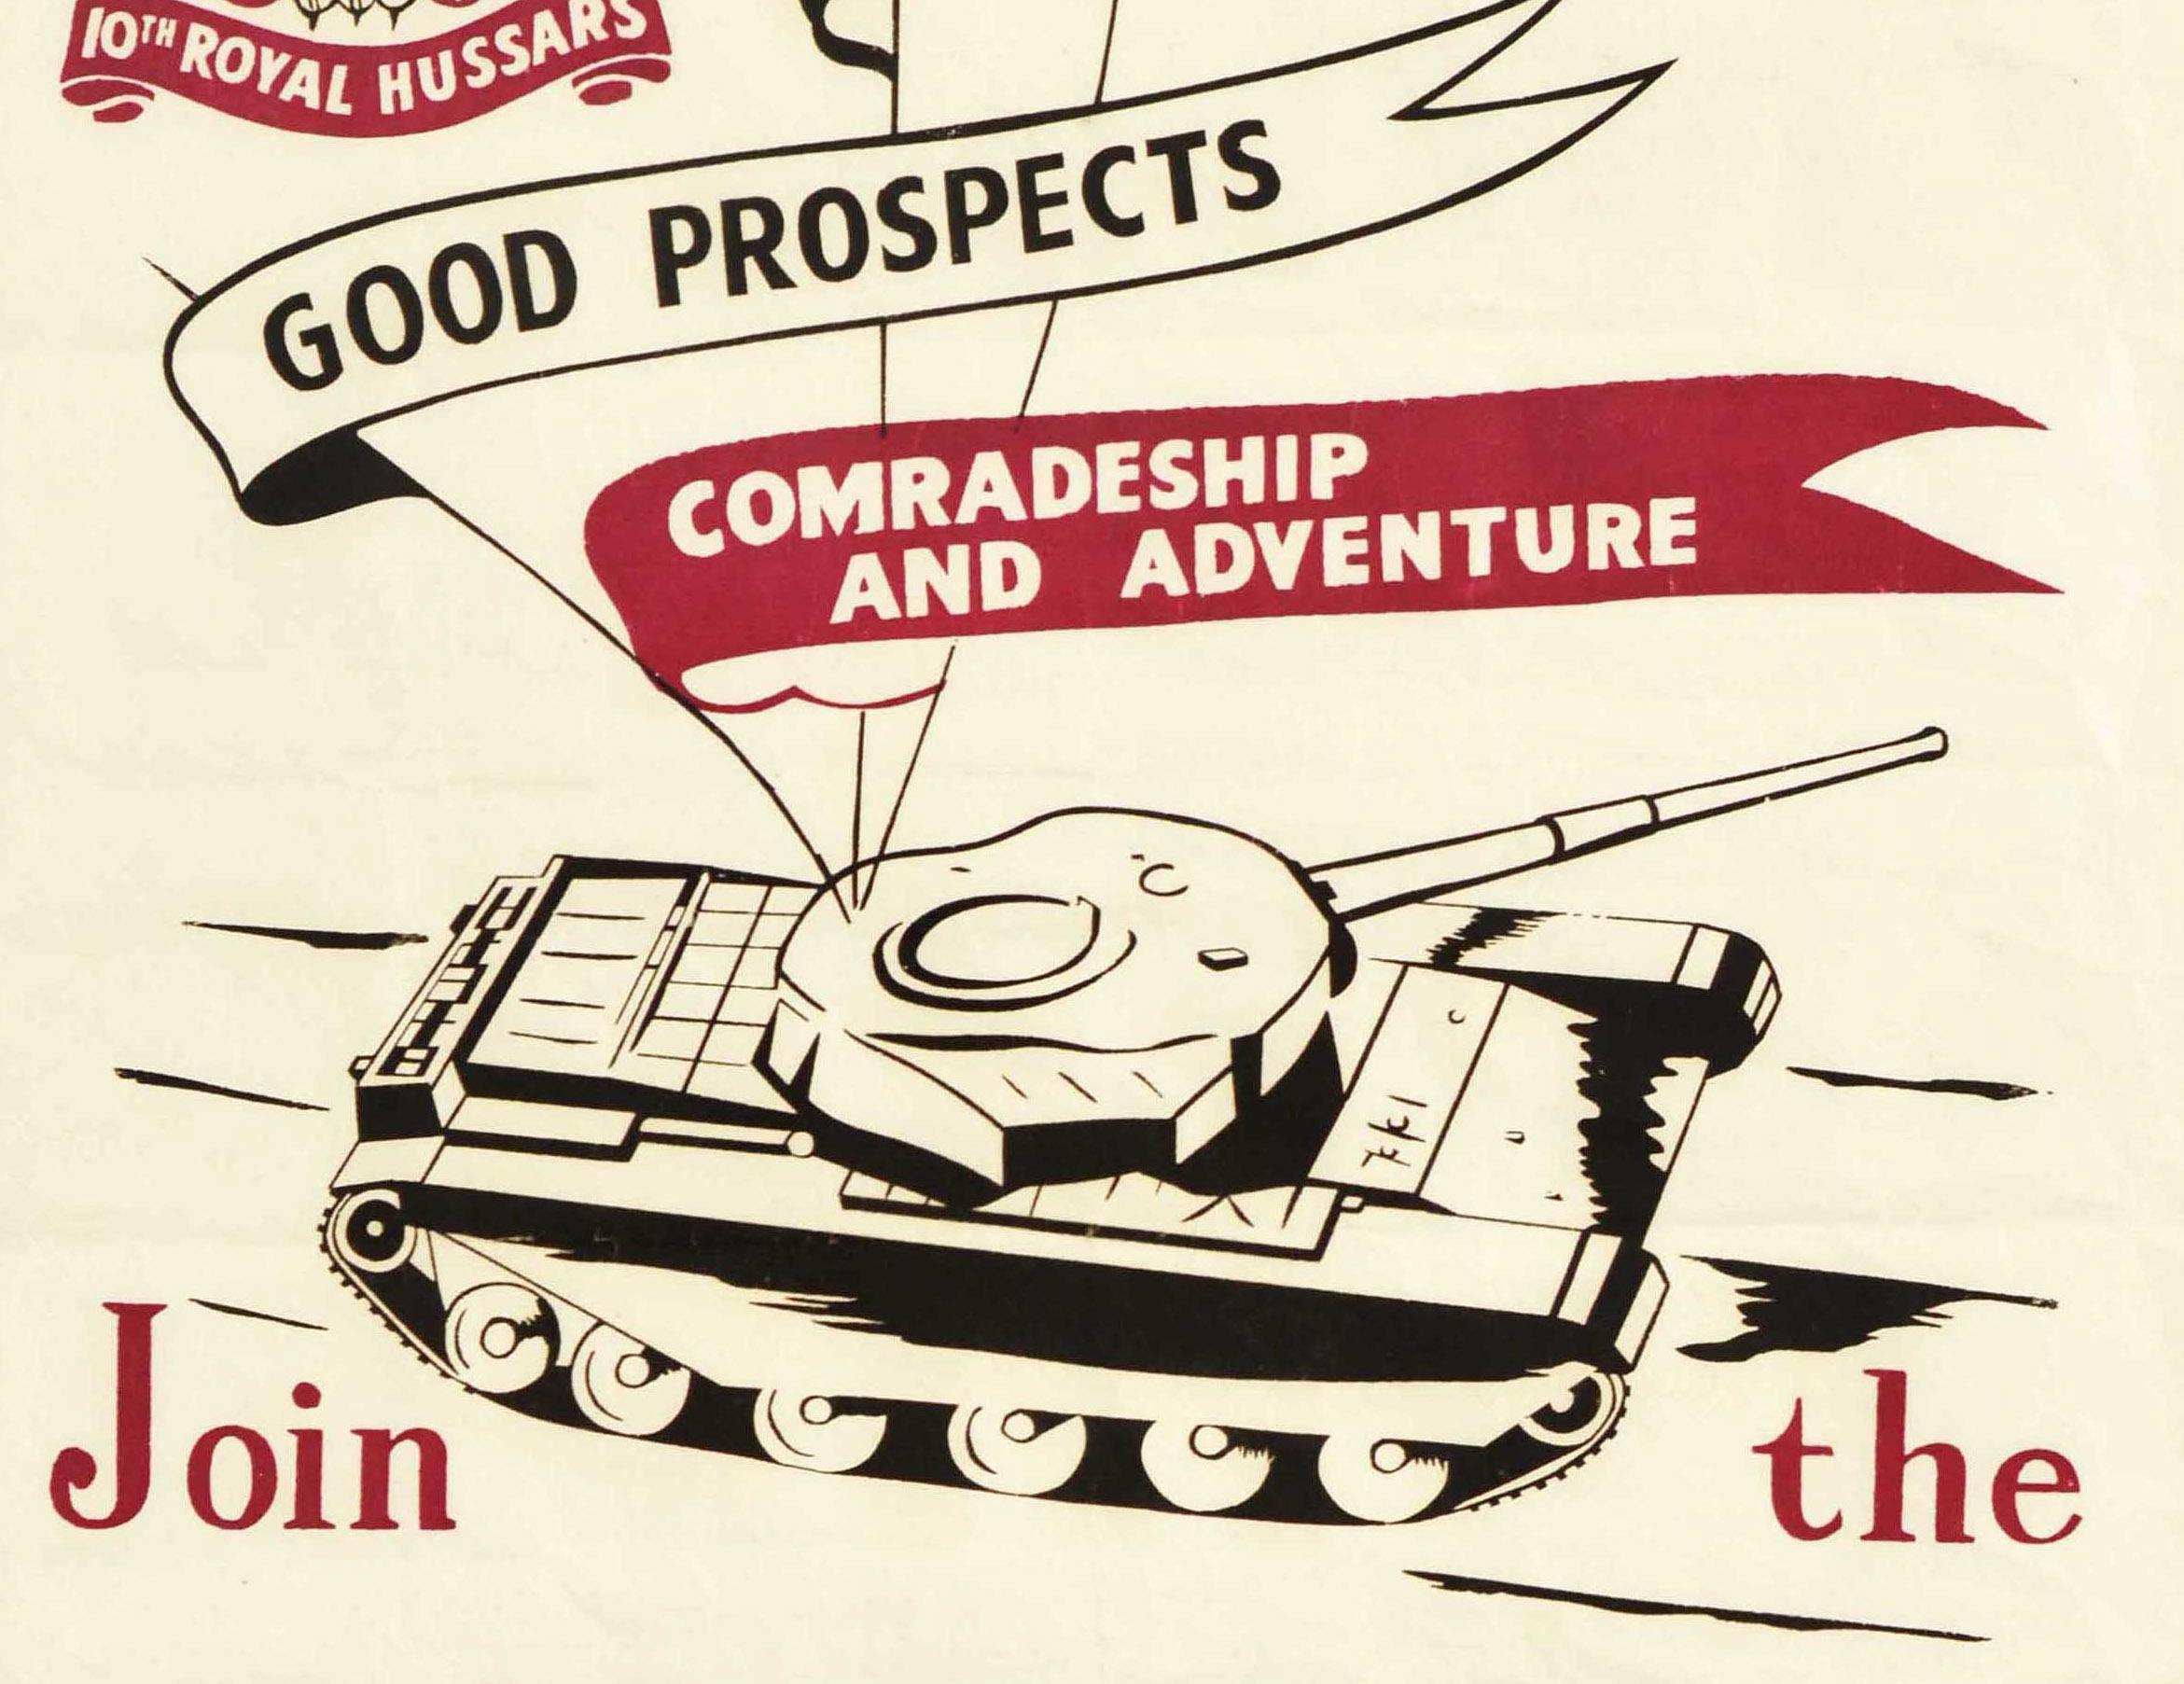 Original vintage military recruitment poster featuring an illustration of a tank with the text on three banner flags above reading - A man's life / Good prospects / Comradeship and Adventure - below the 10th Royal Hussars crown fleur de lis Ich Dien